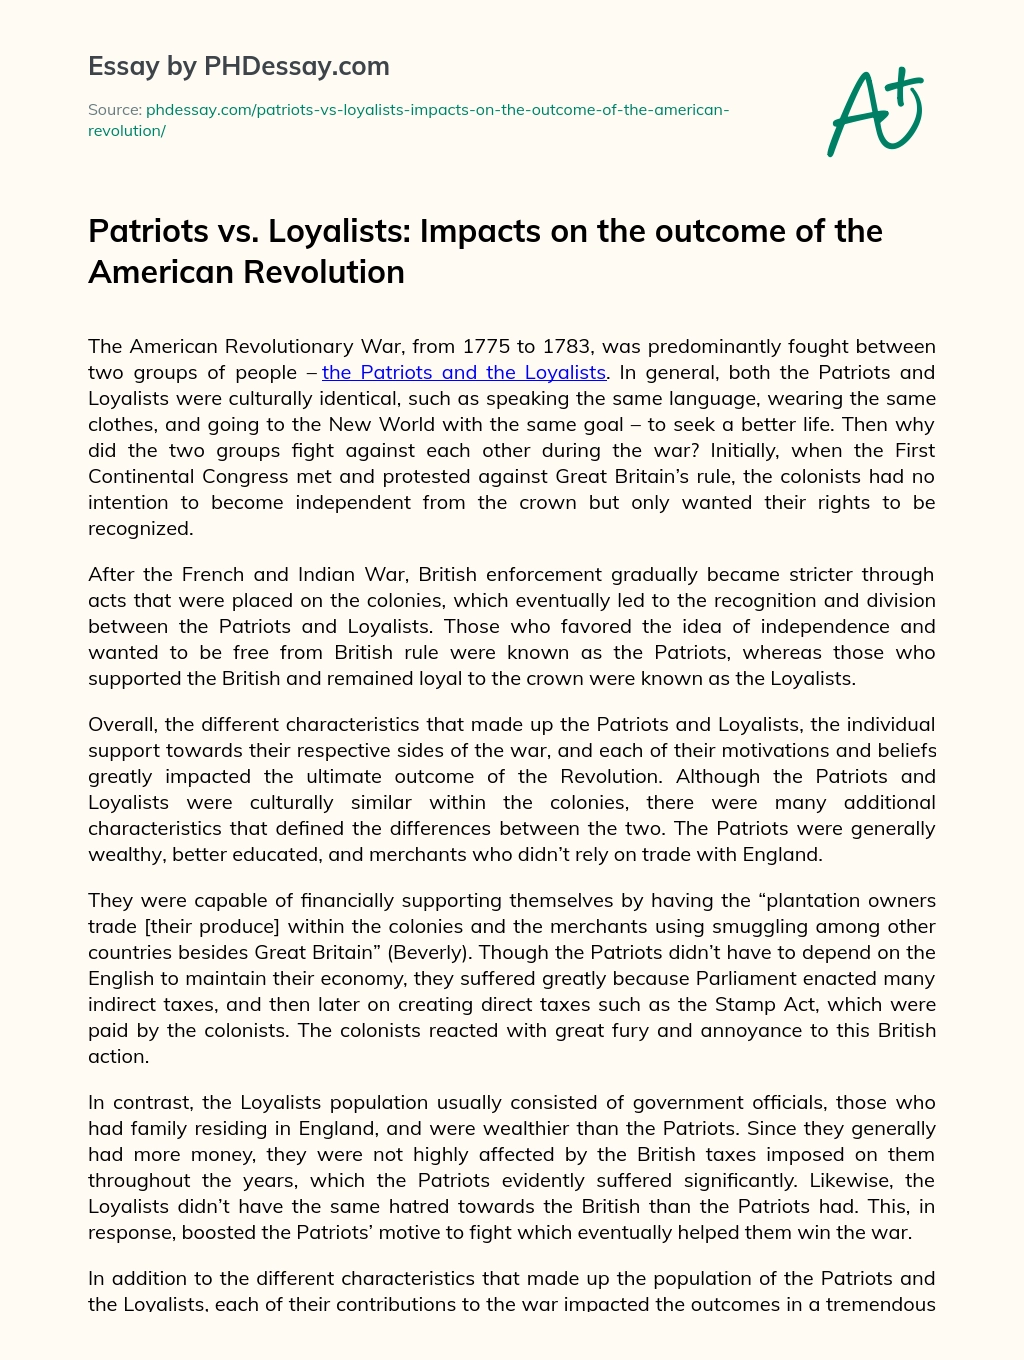 Patriots vs. Loyalists: Impacts on the outcome of the American Revolution essay